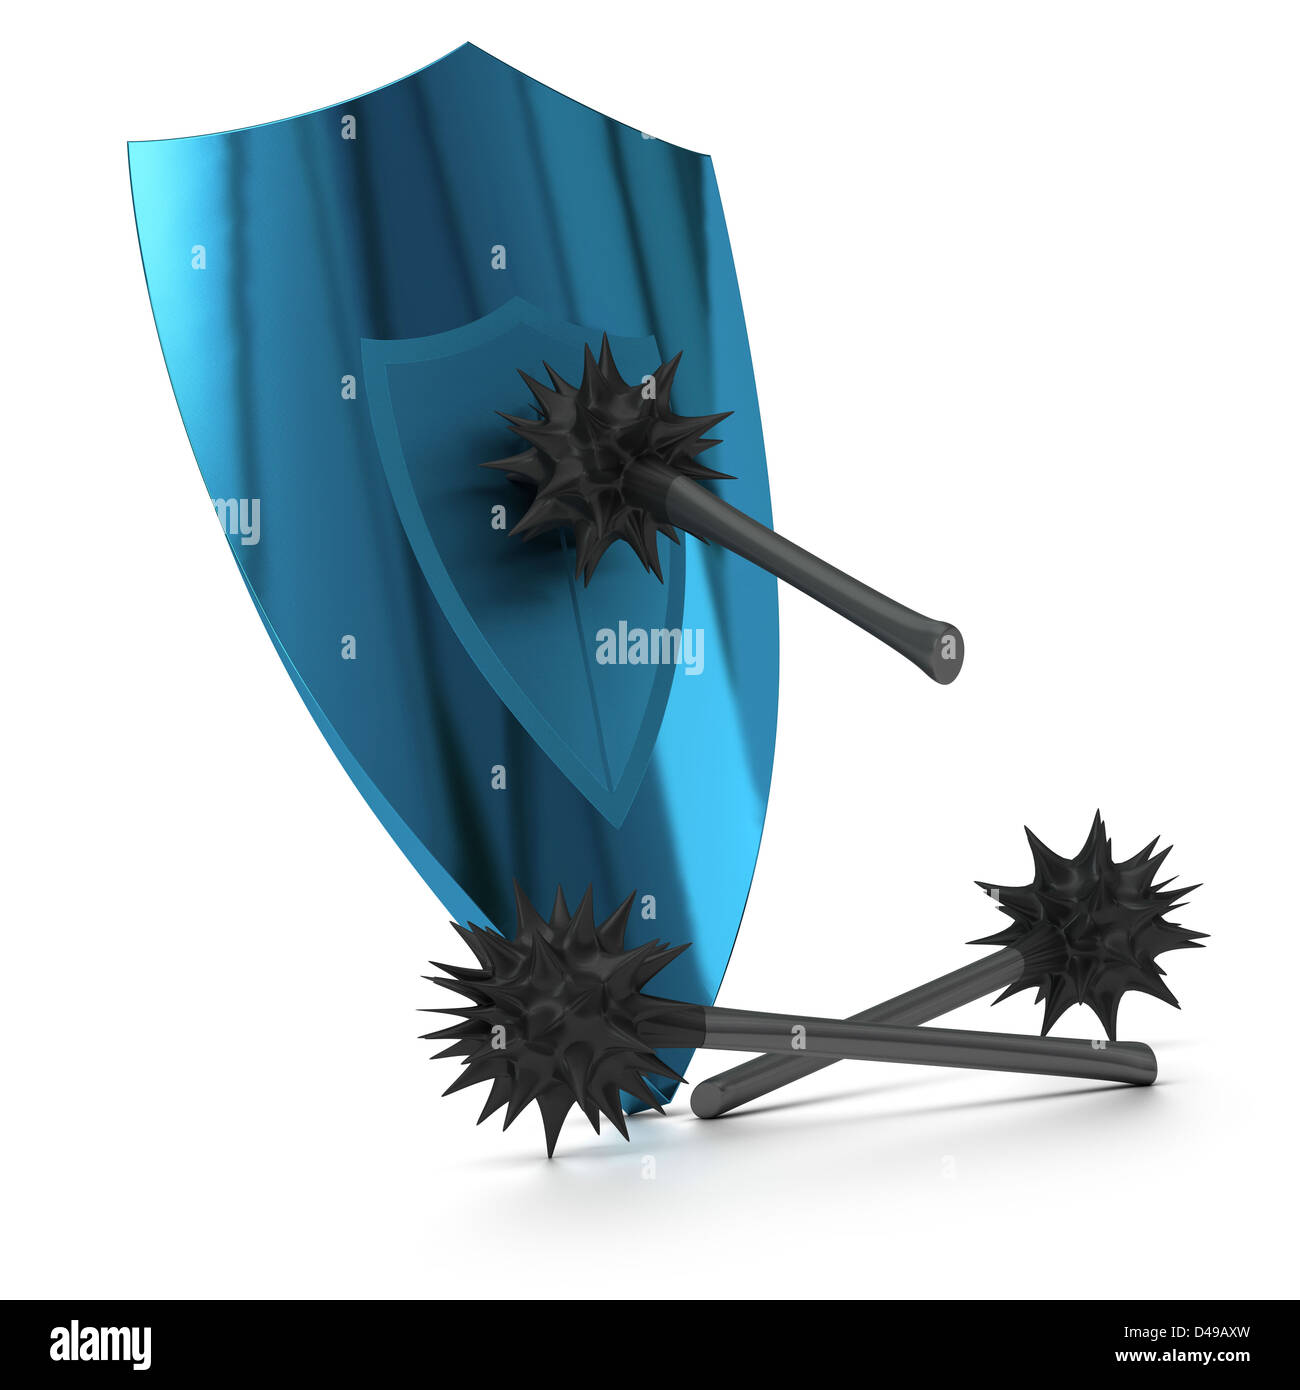 blue shield attacked by antique virusses image over white background Stock Photo